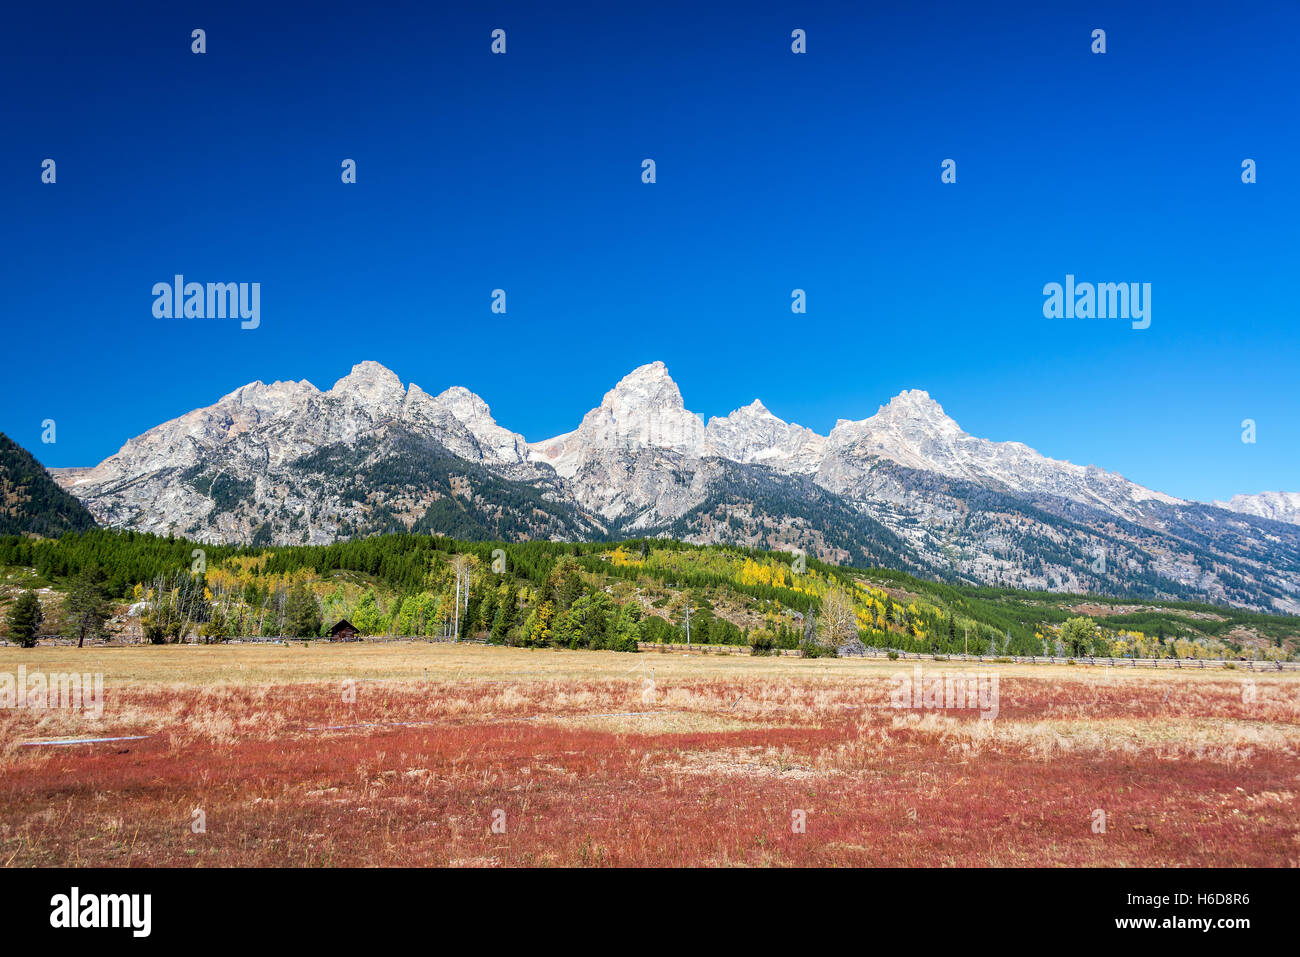 Beautiful and colorful landscape of the Teton Range in Grand Teton National Park Stock Photo